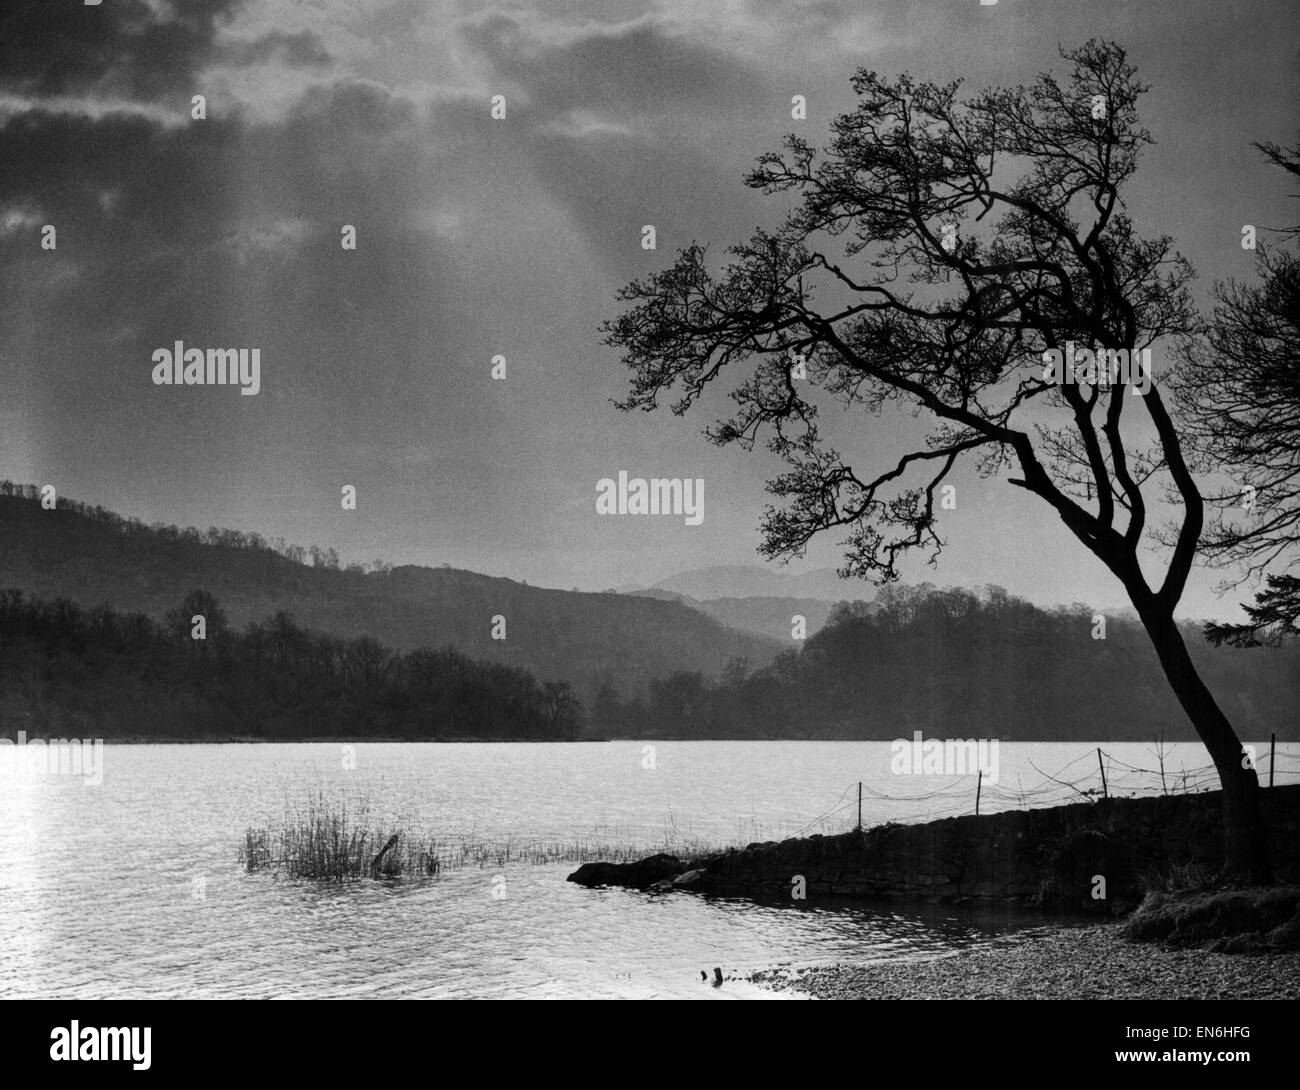 Loch Ard, a body of fresh water in the Loch Lomond and the Trossachs National Park, Stirling District, Scotland, 14th March 1953. Stock Photo